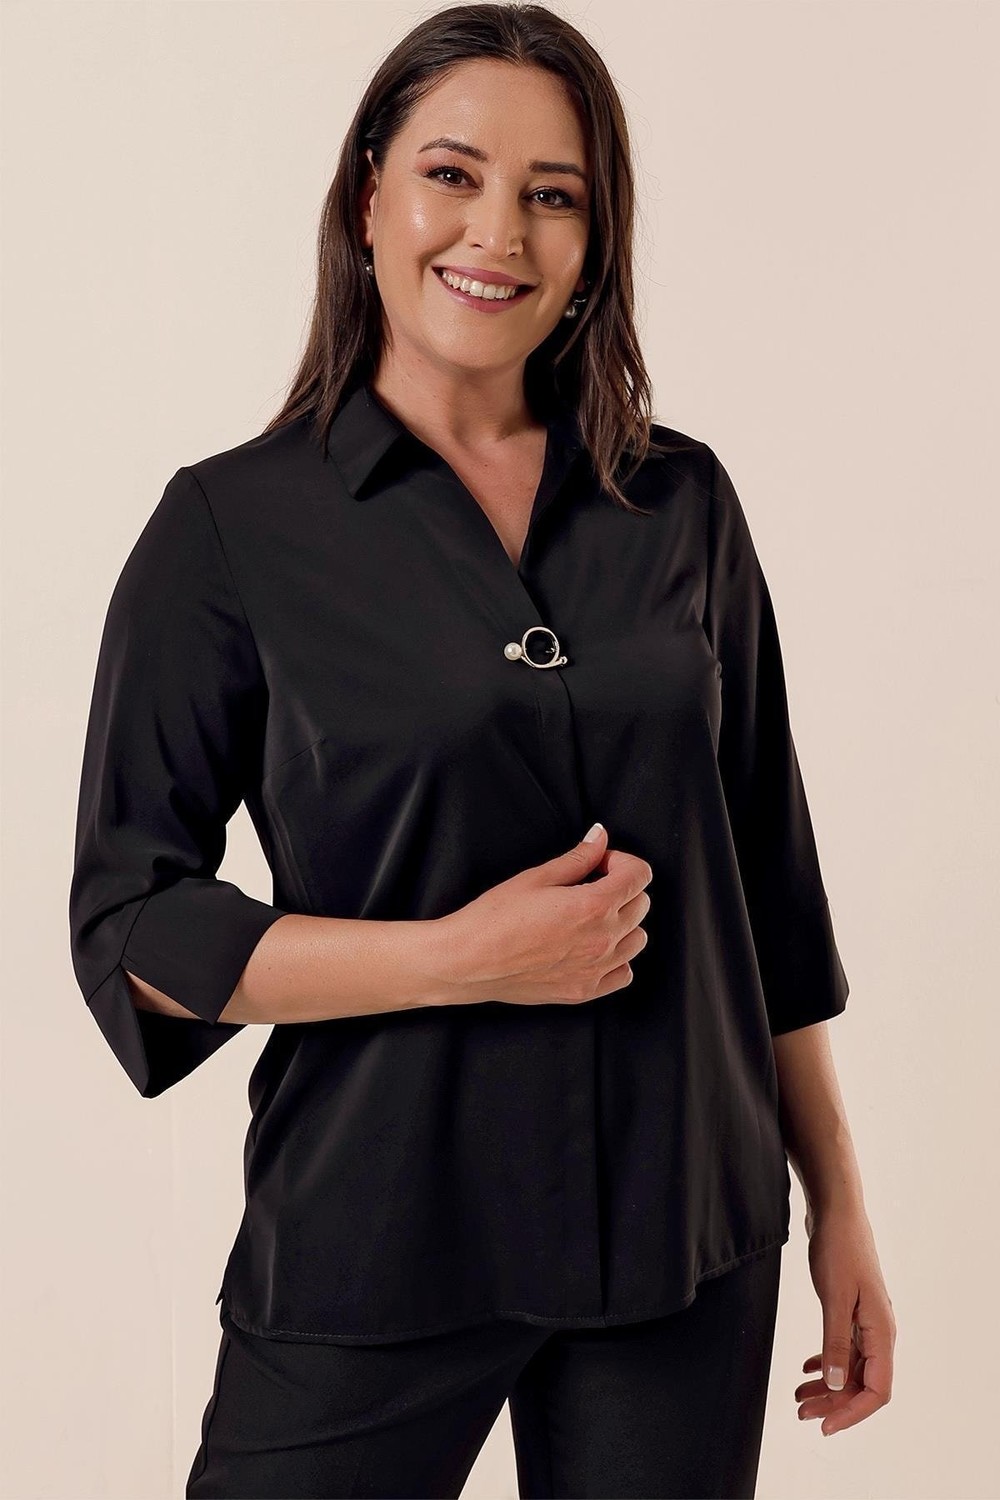 By Saygı Polo Neck With Brooch Quarter Sleeve Plus Size Blouse Black